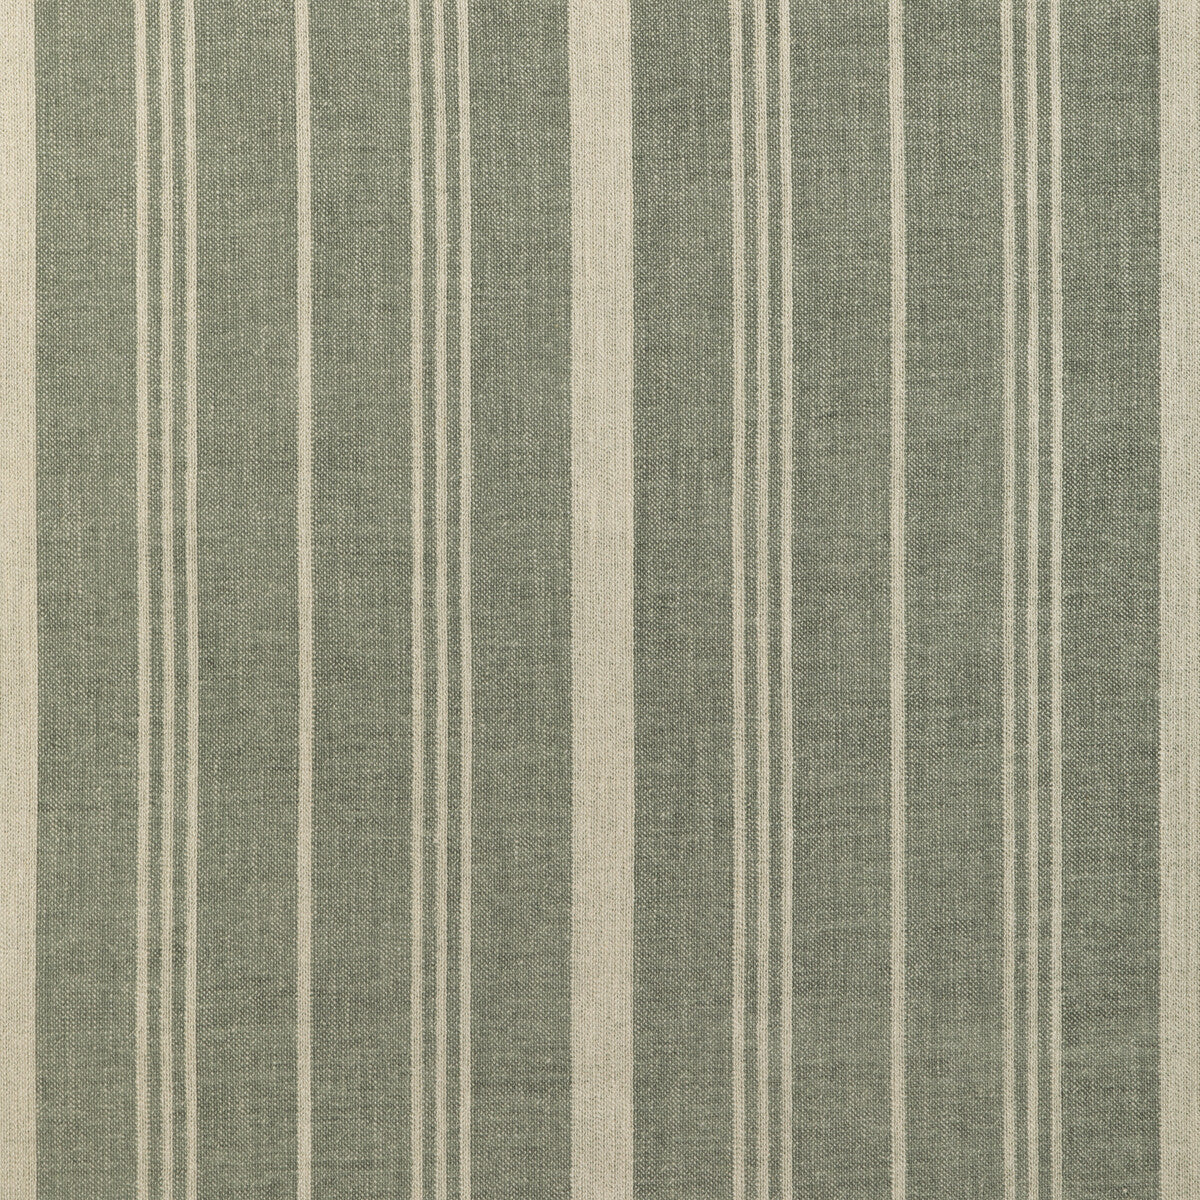 Furrow Stripe fabric in sage color - pattern 36902.130.0 - by Kravet Couture in the Atelier Weaves collection